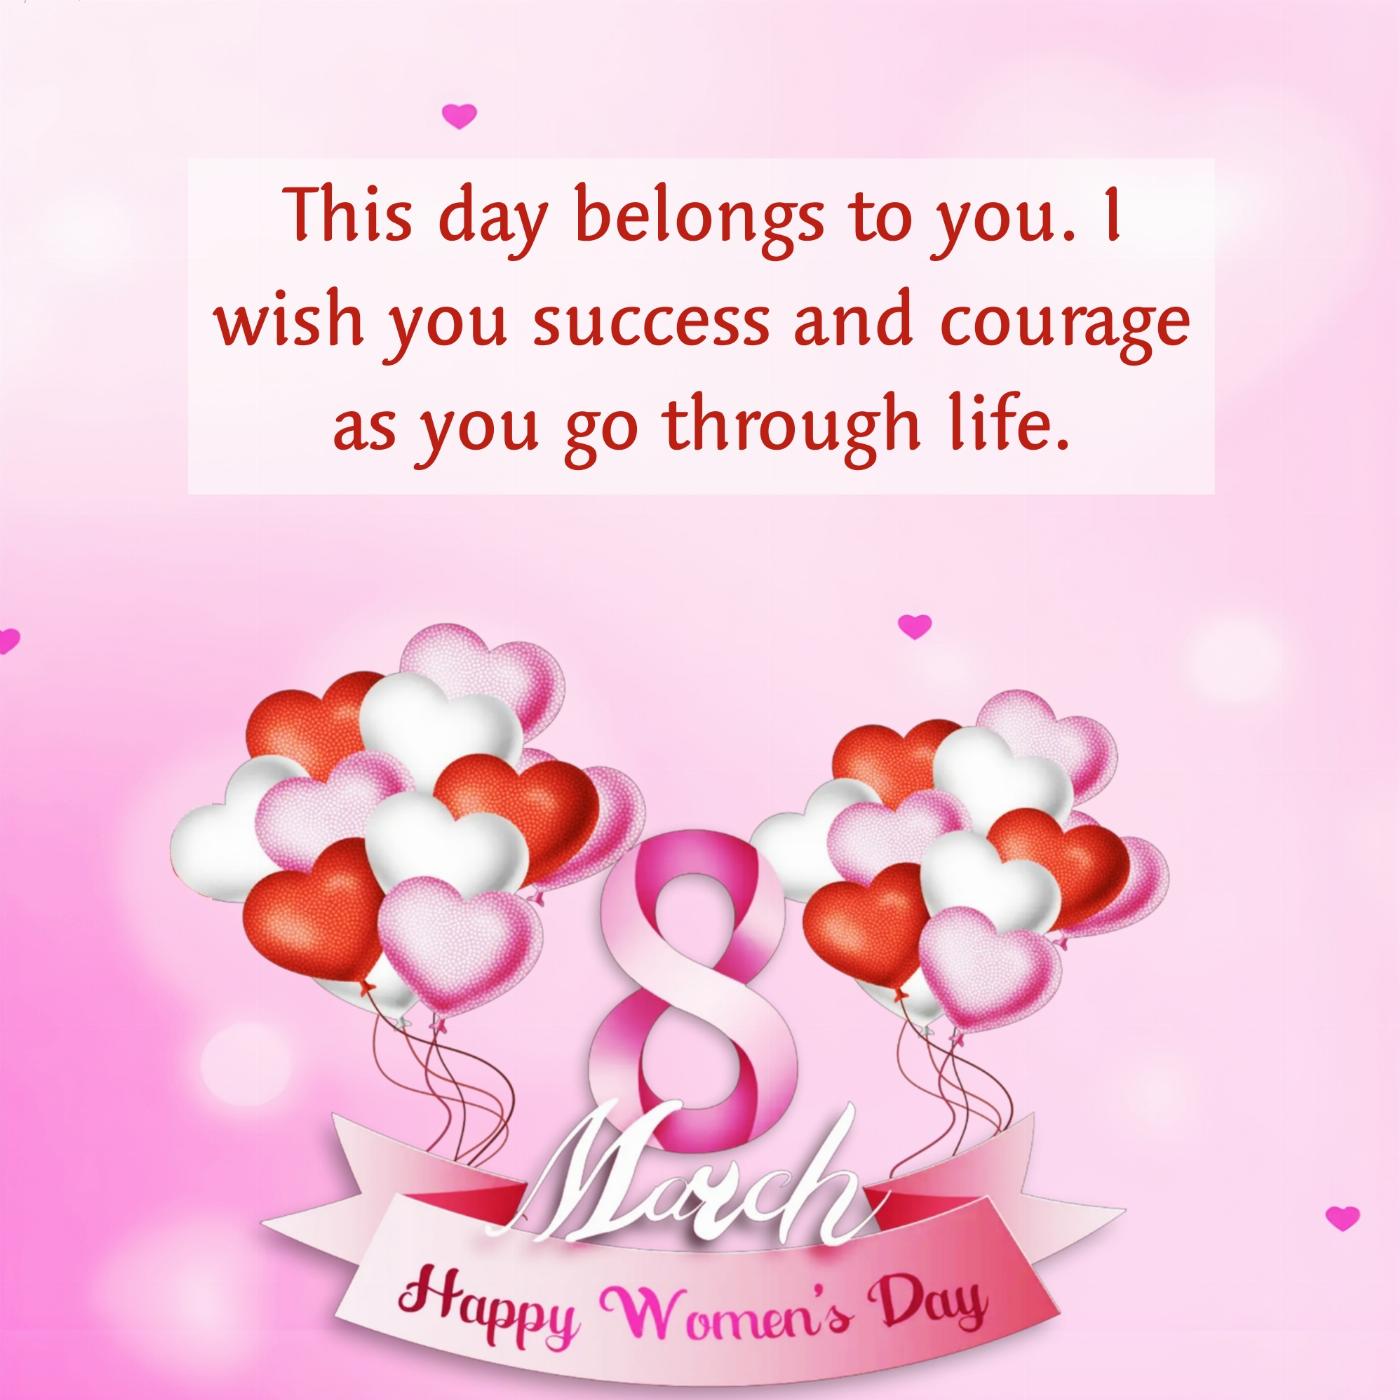 This day belongs to you I wish you success and courage